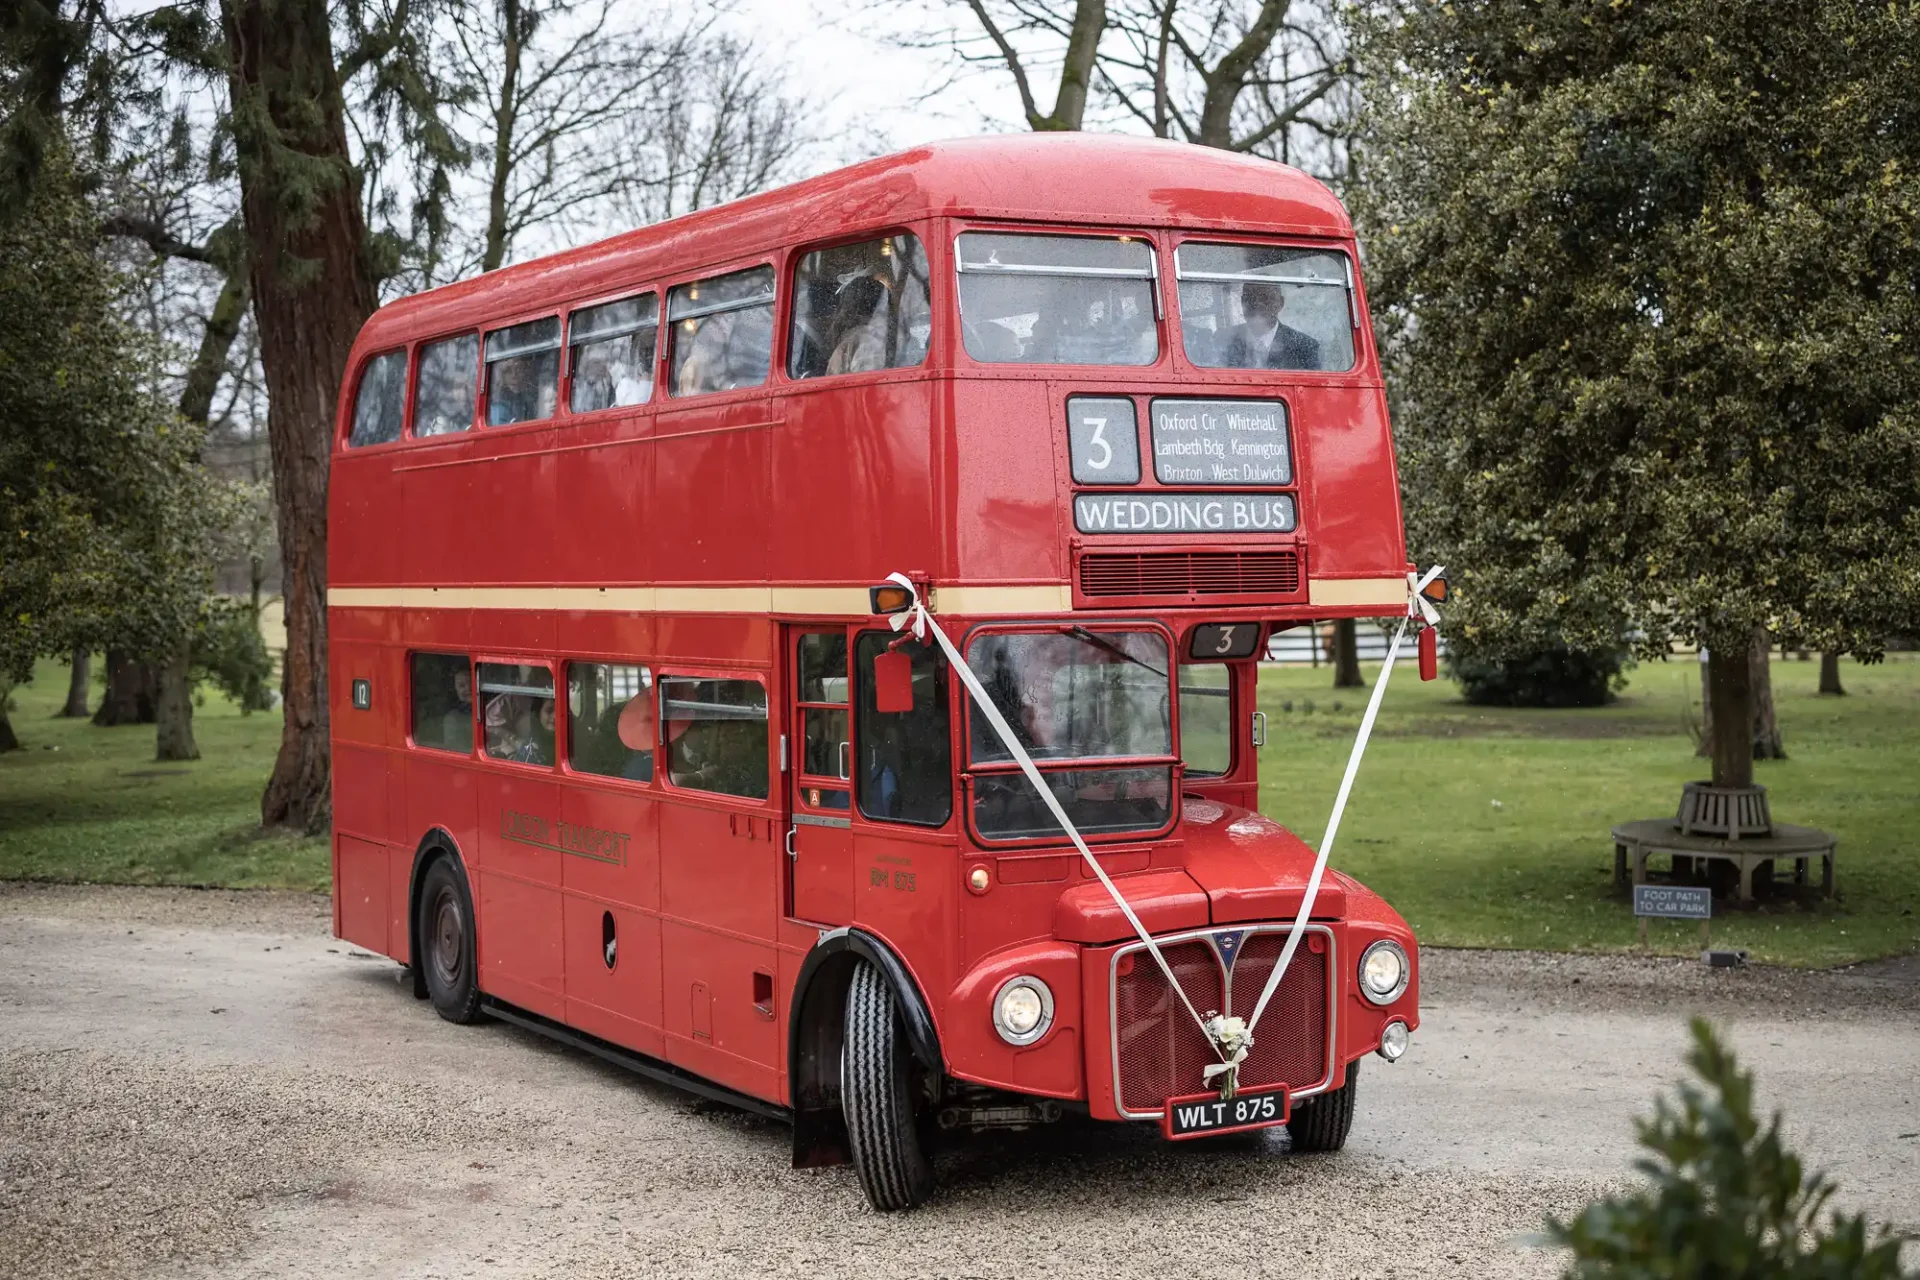 A red double-decker bus labeled "wedding bus" parked on a gravel path in a serene park setting with trees in the background.